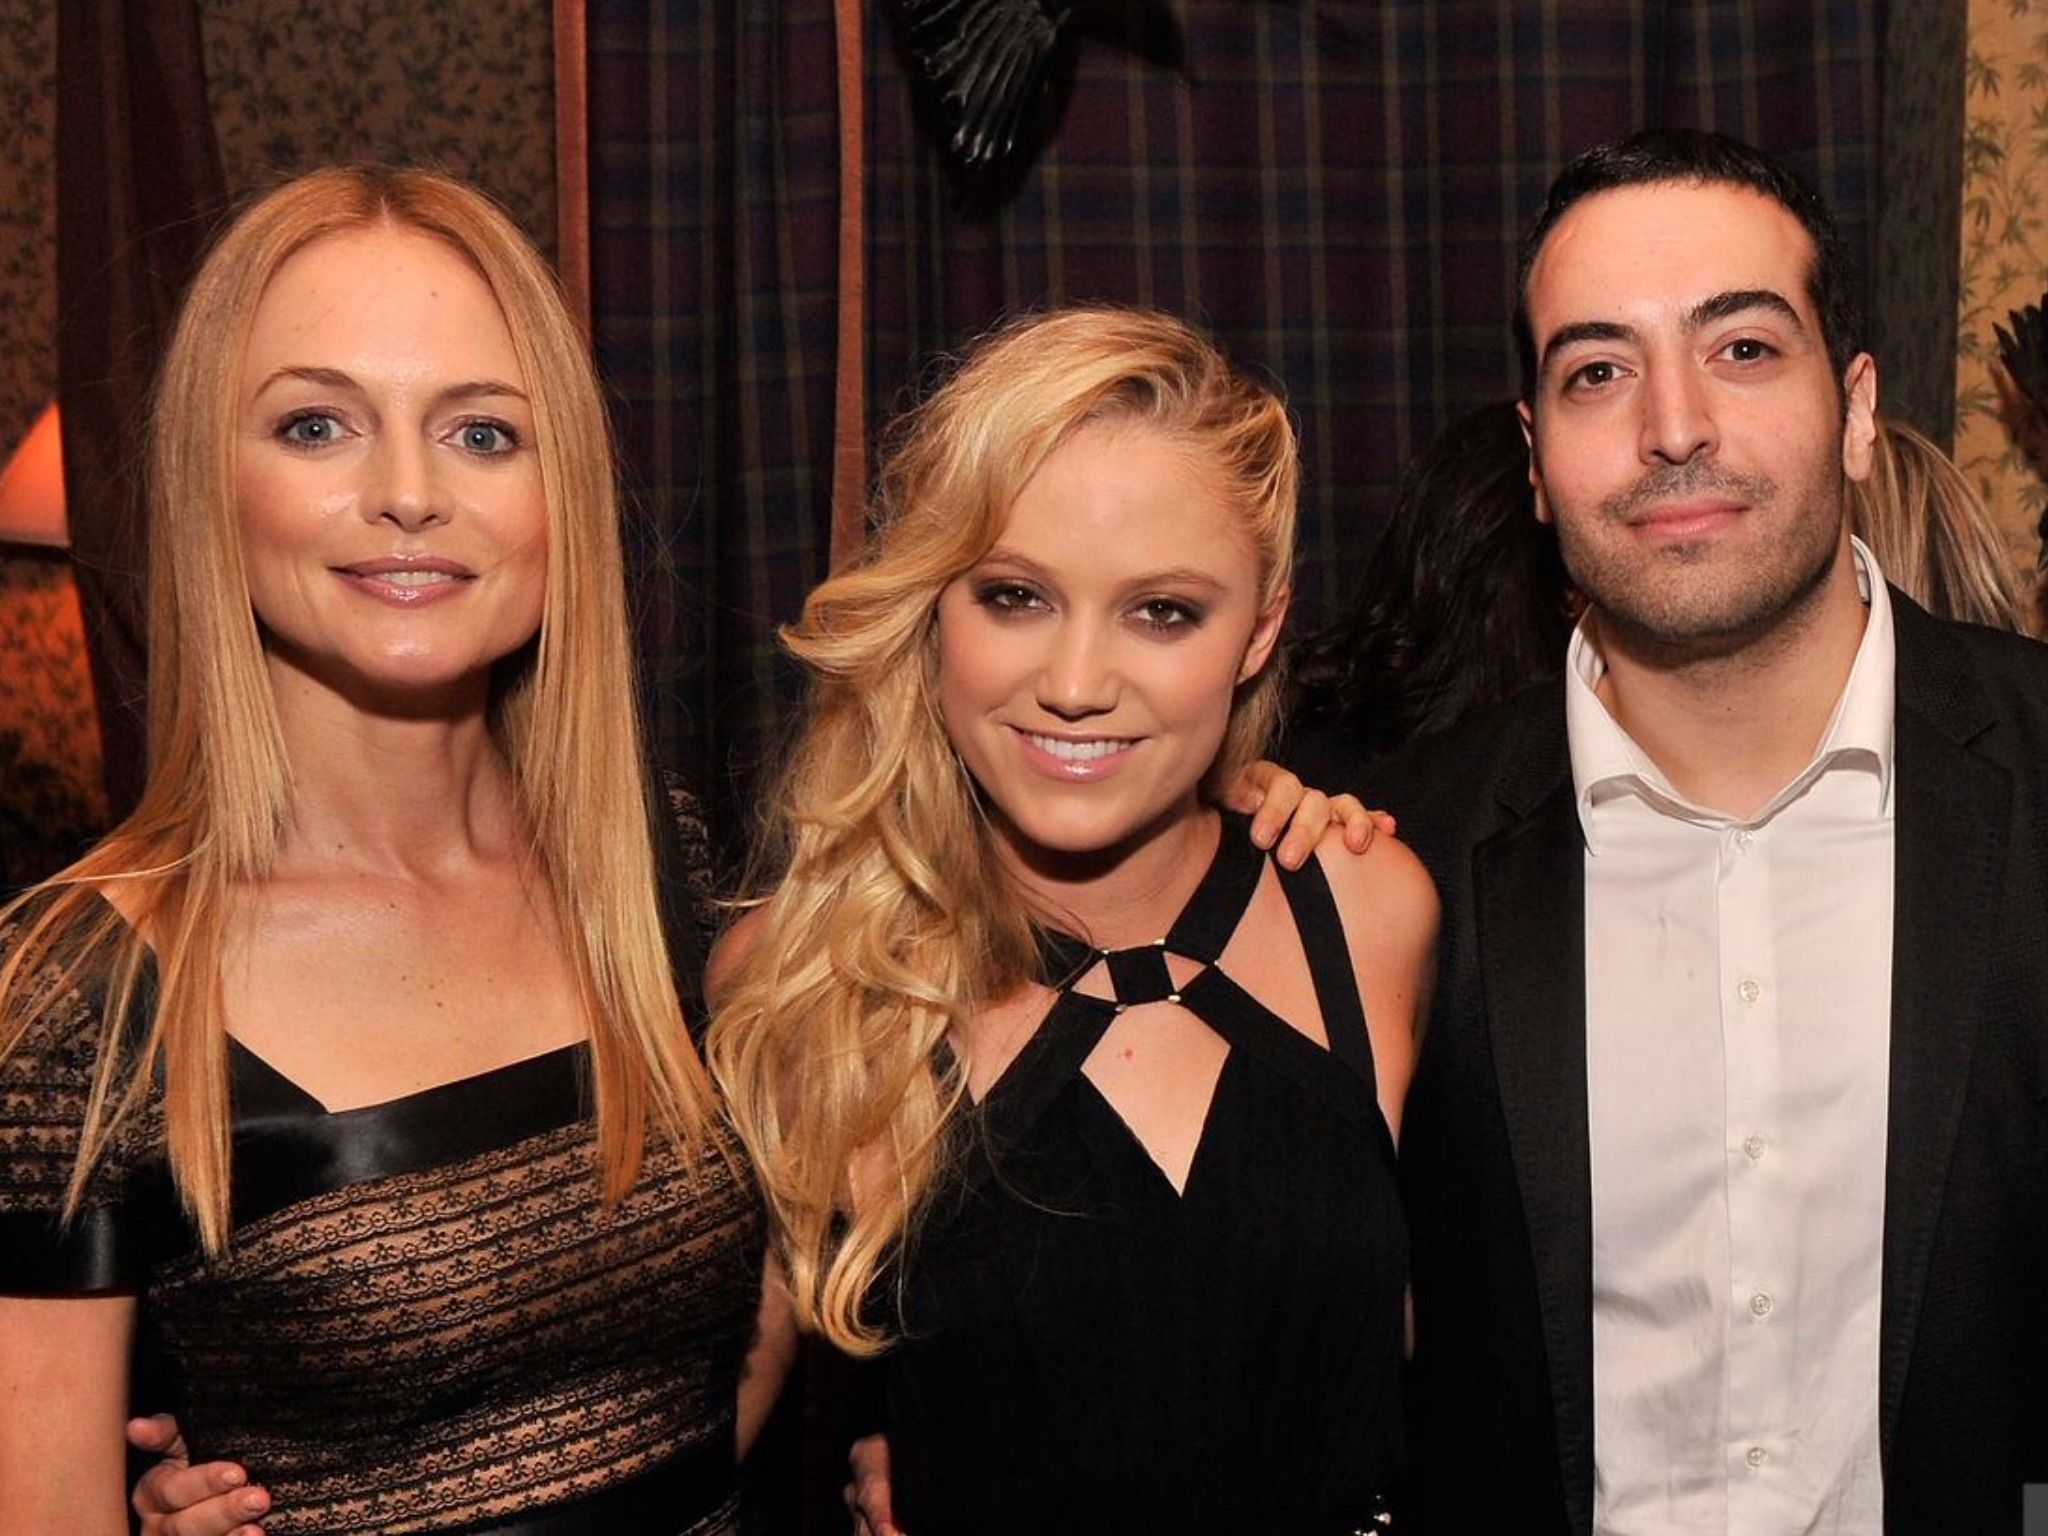 Actresses Heather Graham and Maika Monroe, and producer Mohammed Al Turki attend the 'At Any Price' after party during the 2013 Tribeca Film Festival on April 19, 2013 in New York City. CREDIT: STEPHEN LOVEKIN